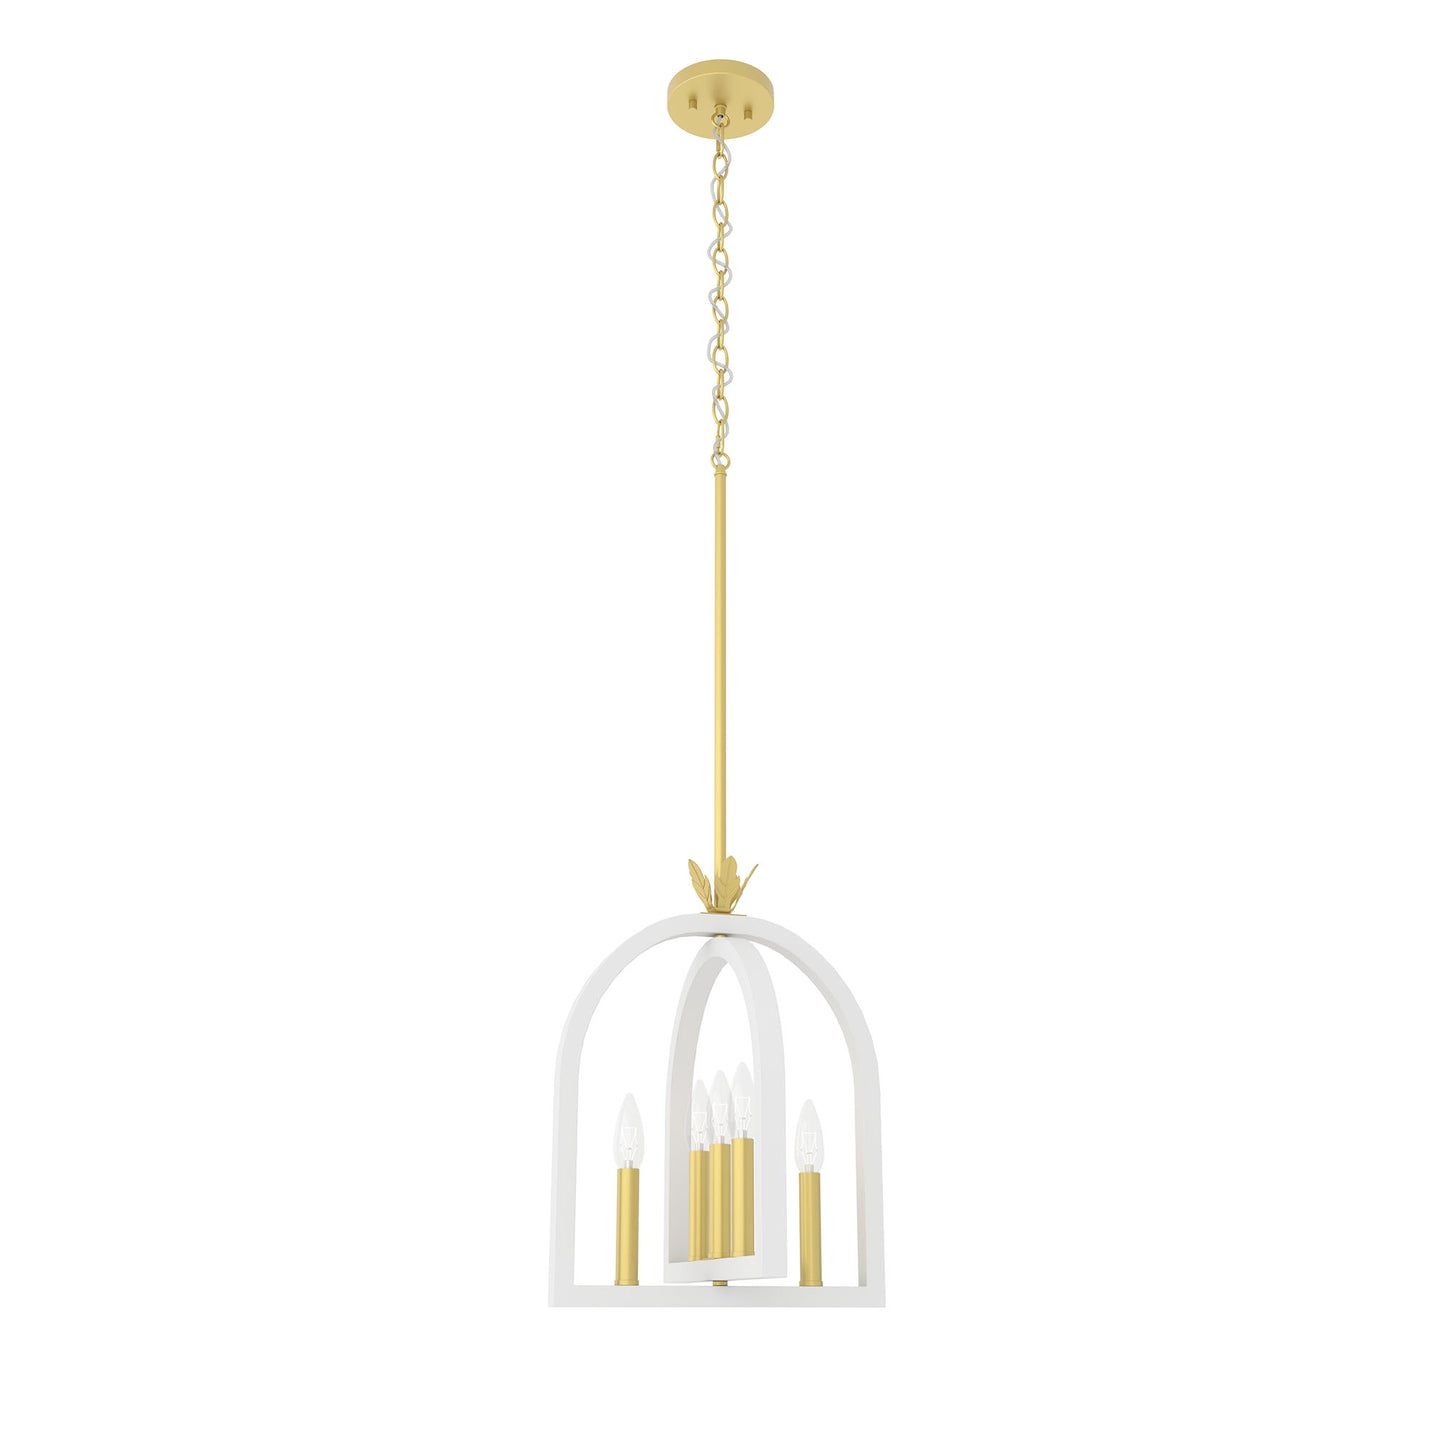 5 light empire lantern chandelier (6) by ACROMA